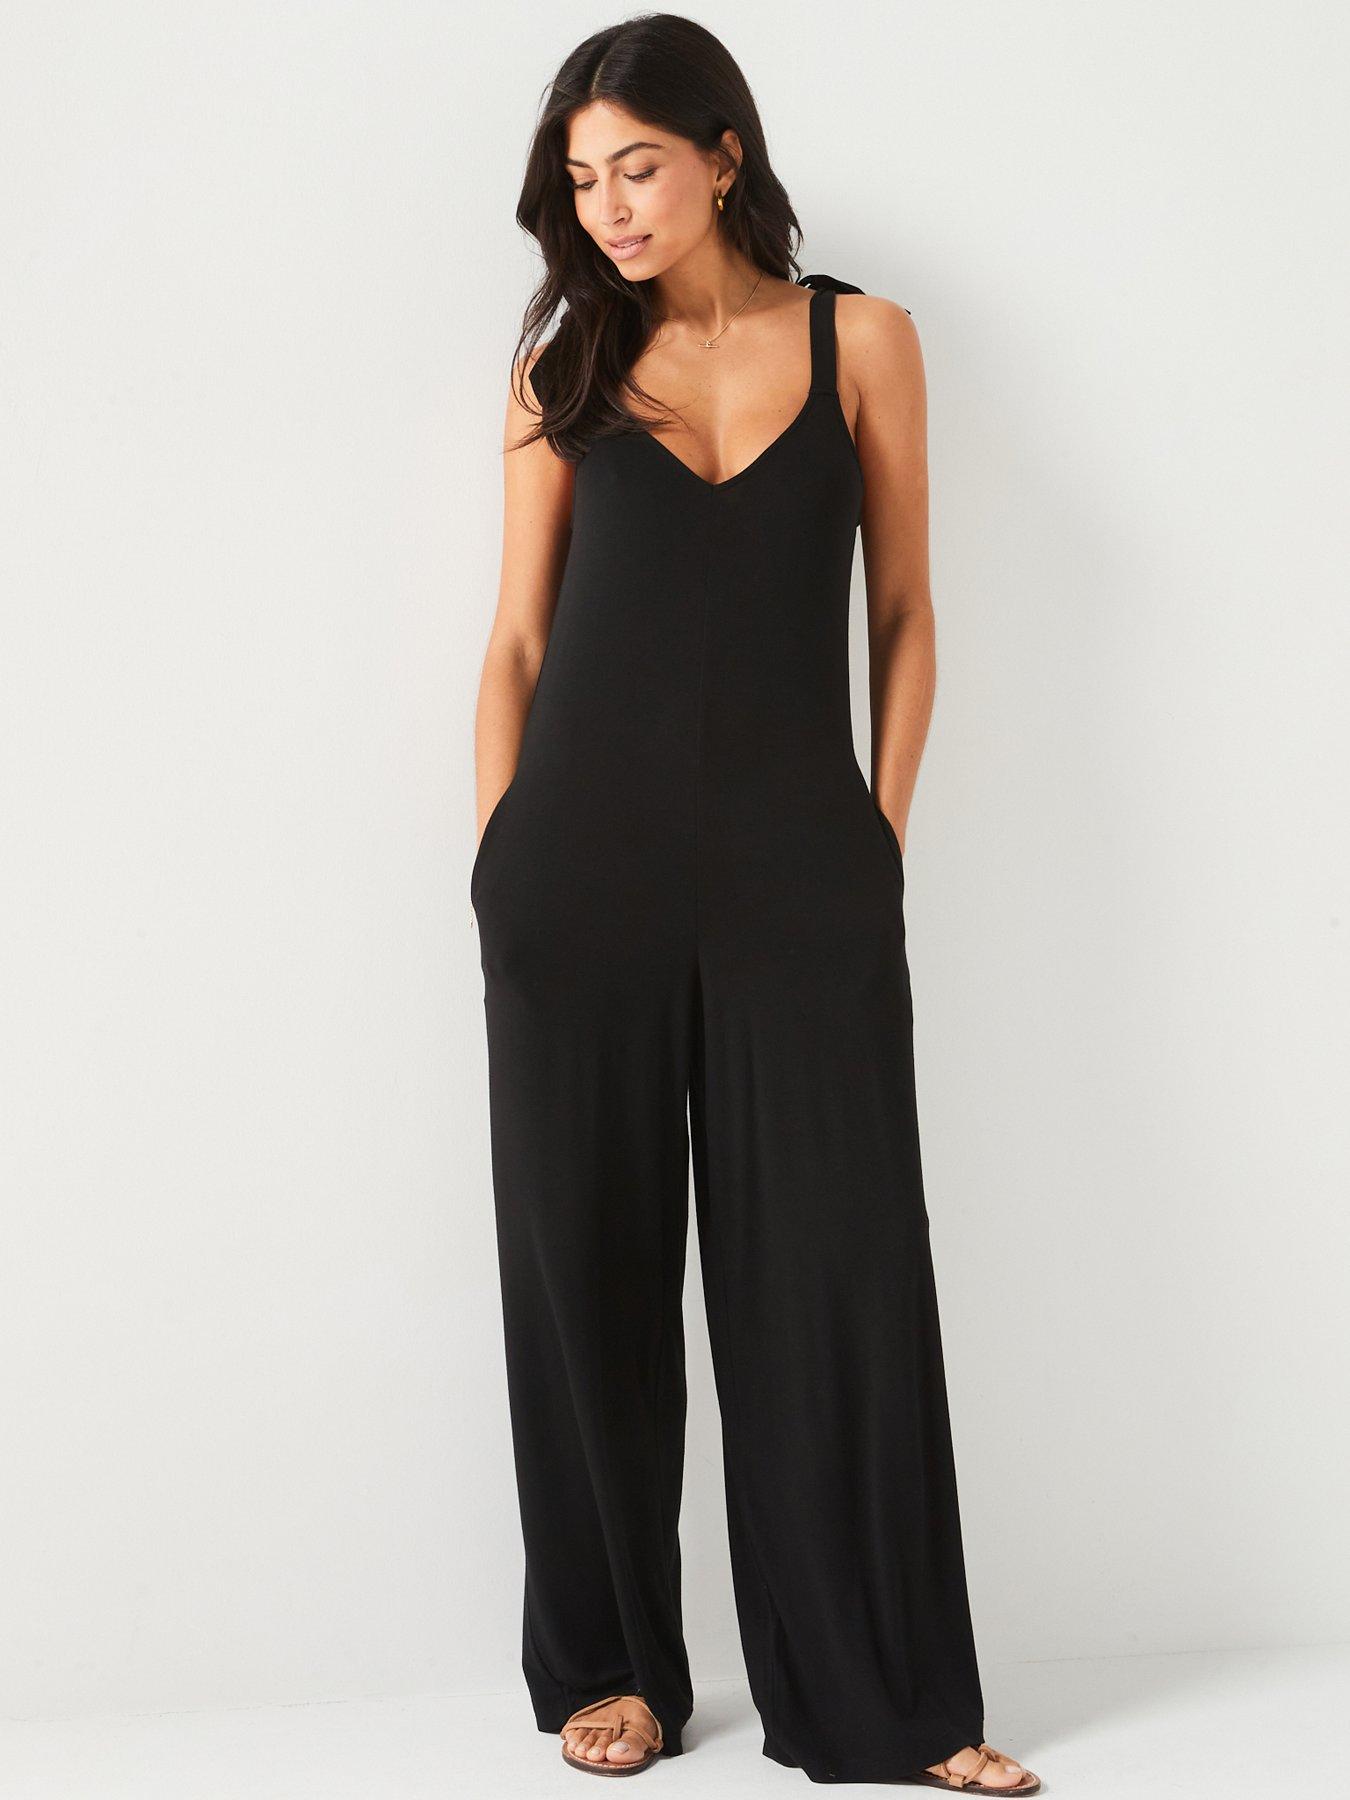 fitness jumpsuit - Playsuits & Jumpsuits Prices and Promotions